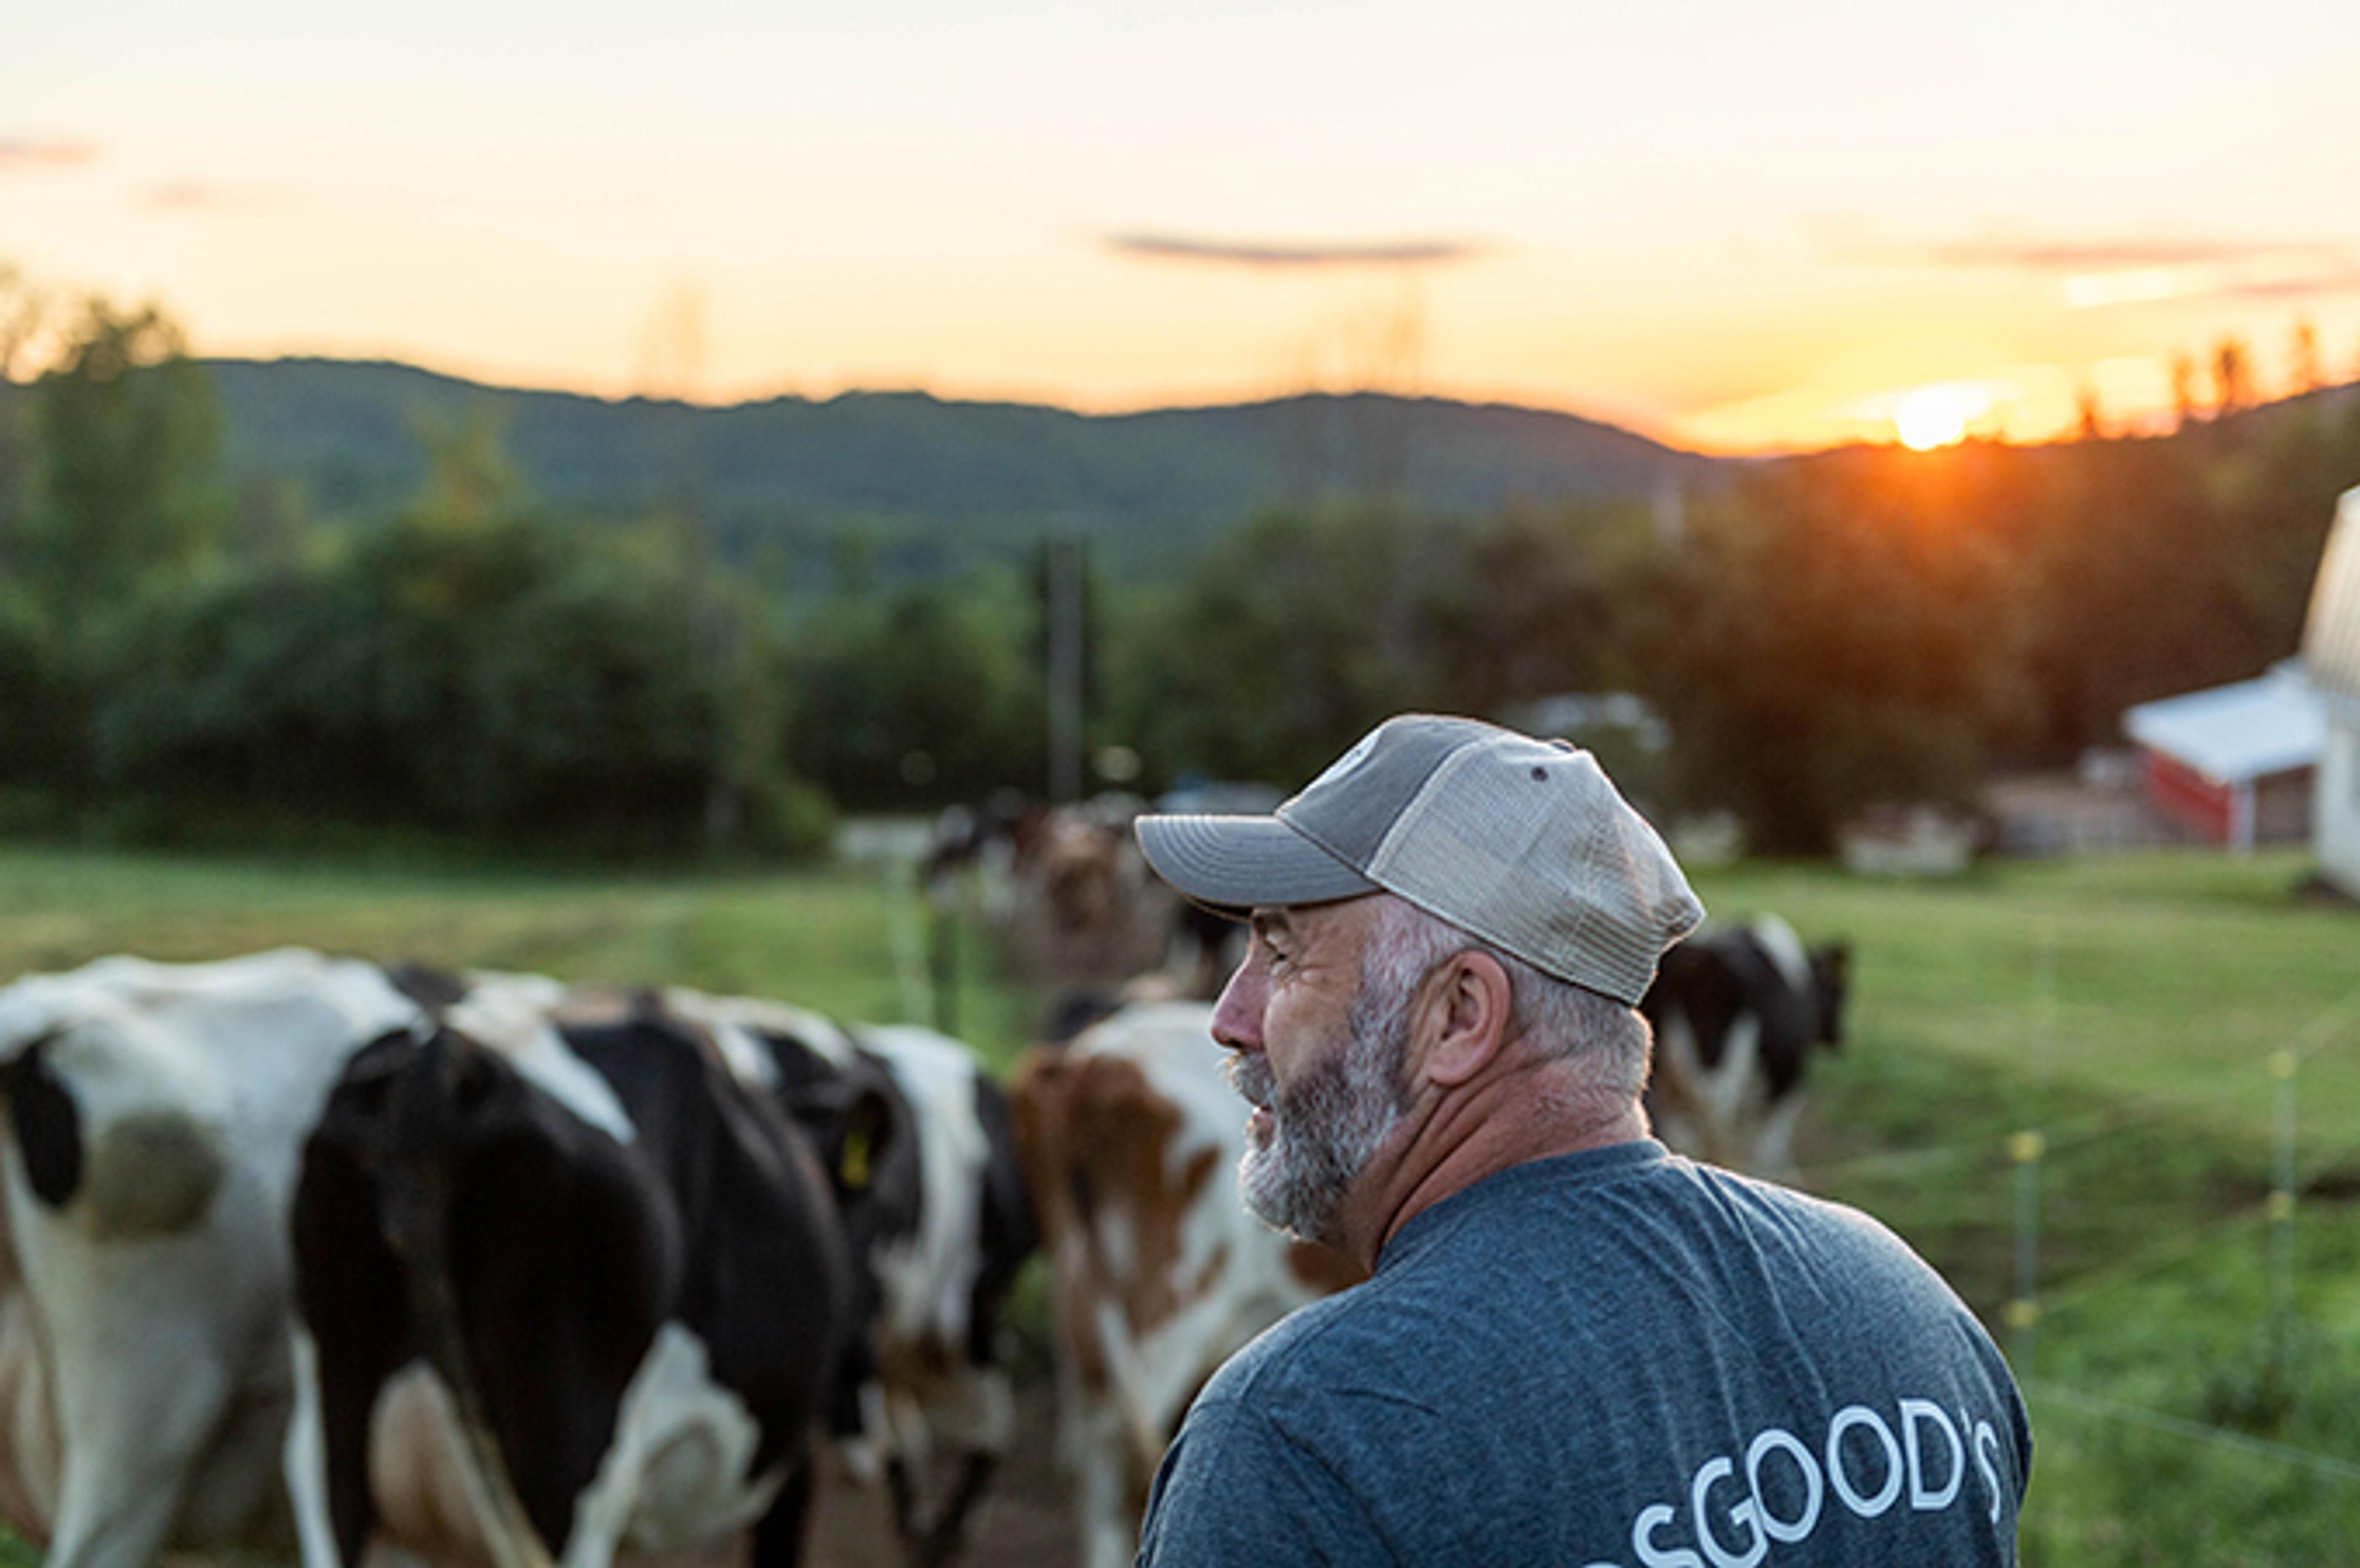 Farmer with hat looking over cows as they walk out to pasture in the sunset.